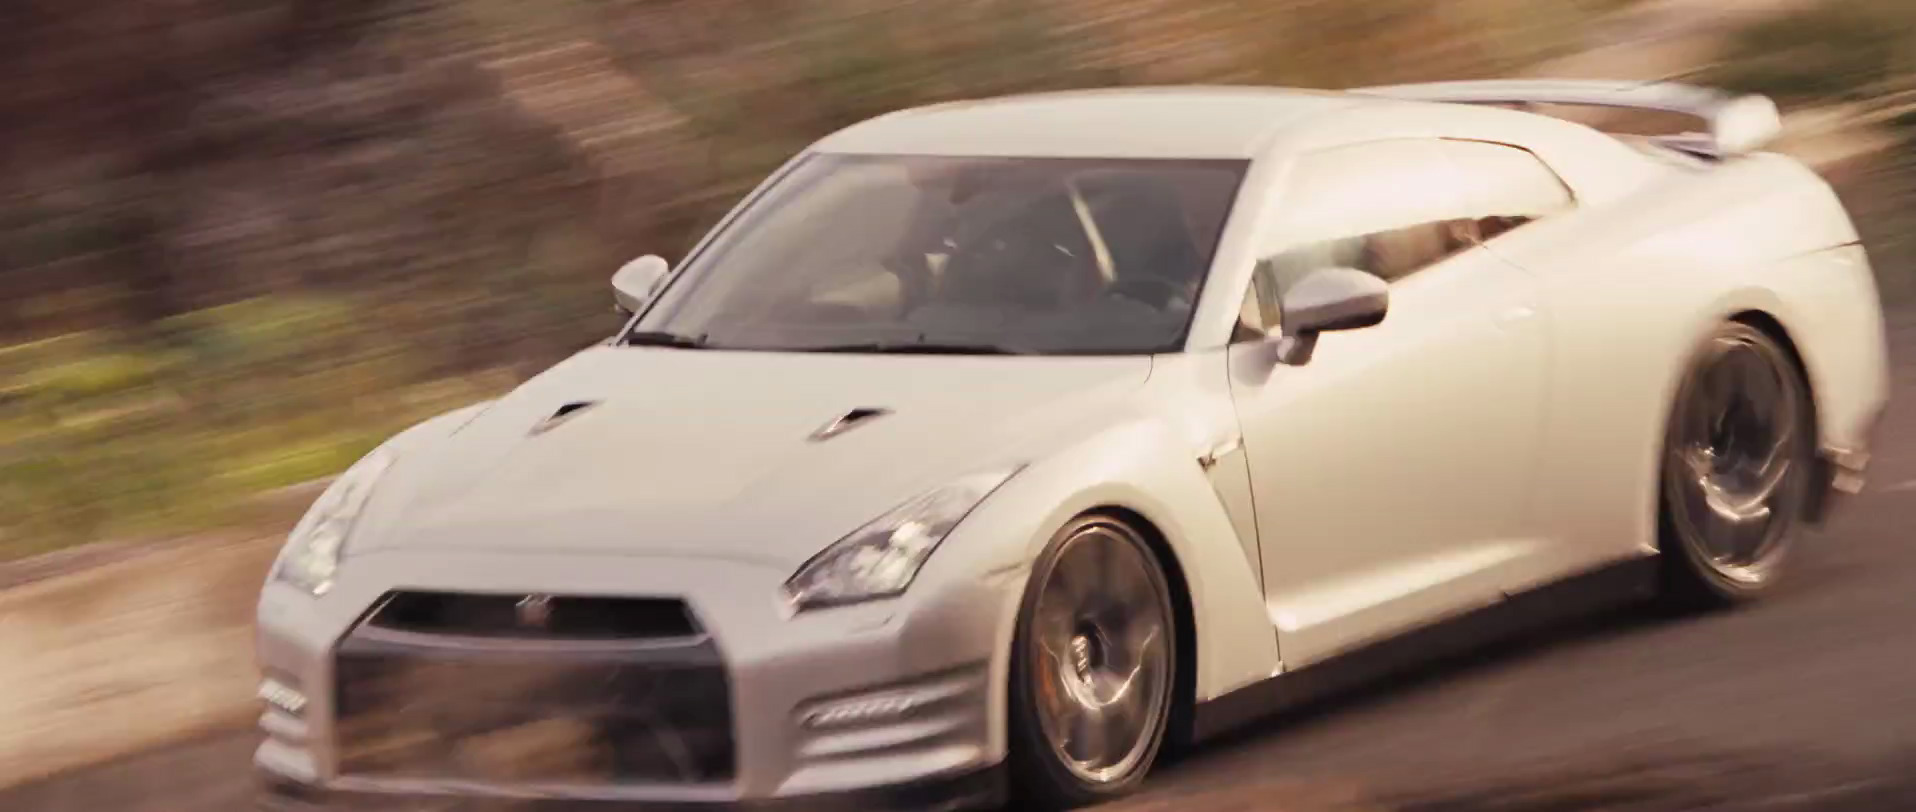 2011 Nissan GT-R R35 | The Fast and the Furious Wiki | FANDOM powered by Wikia